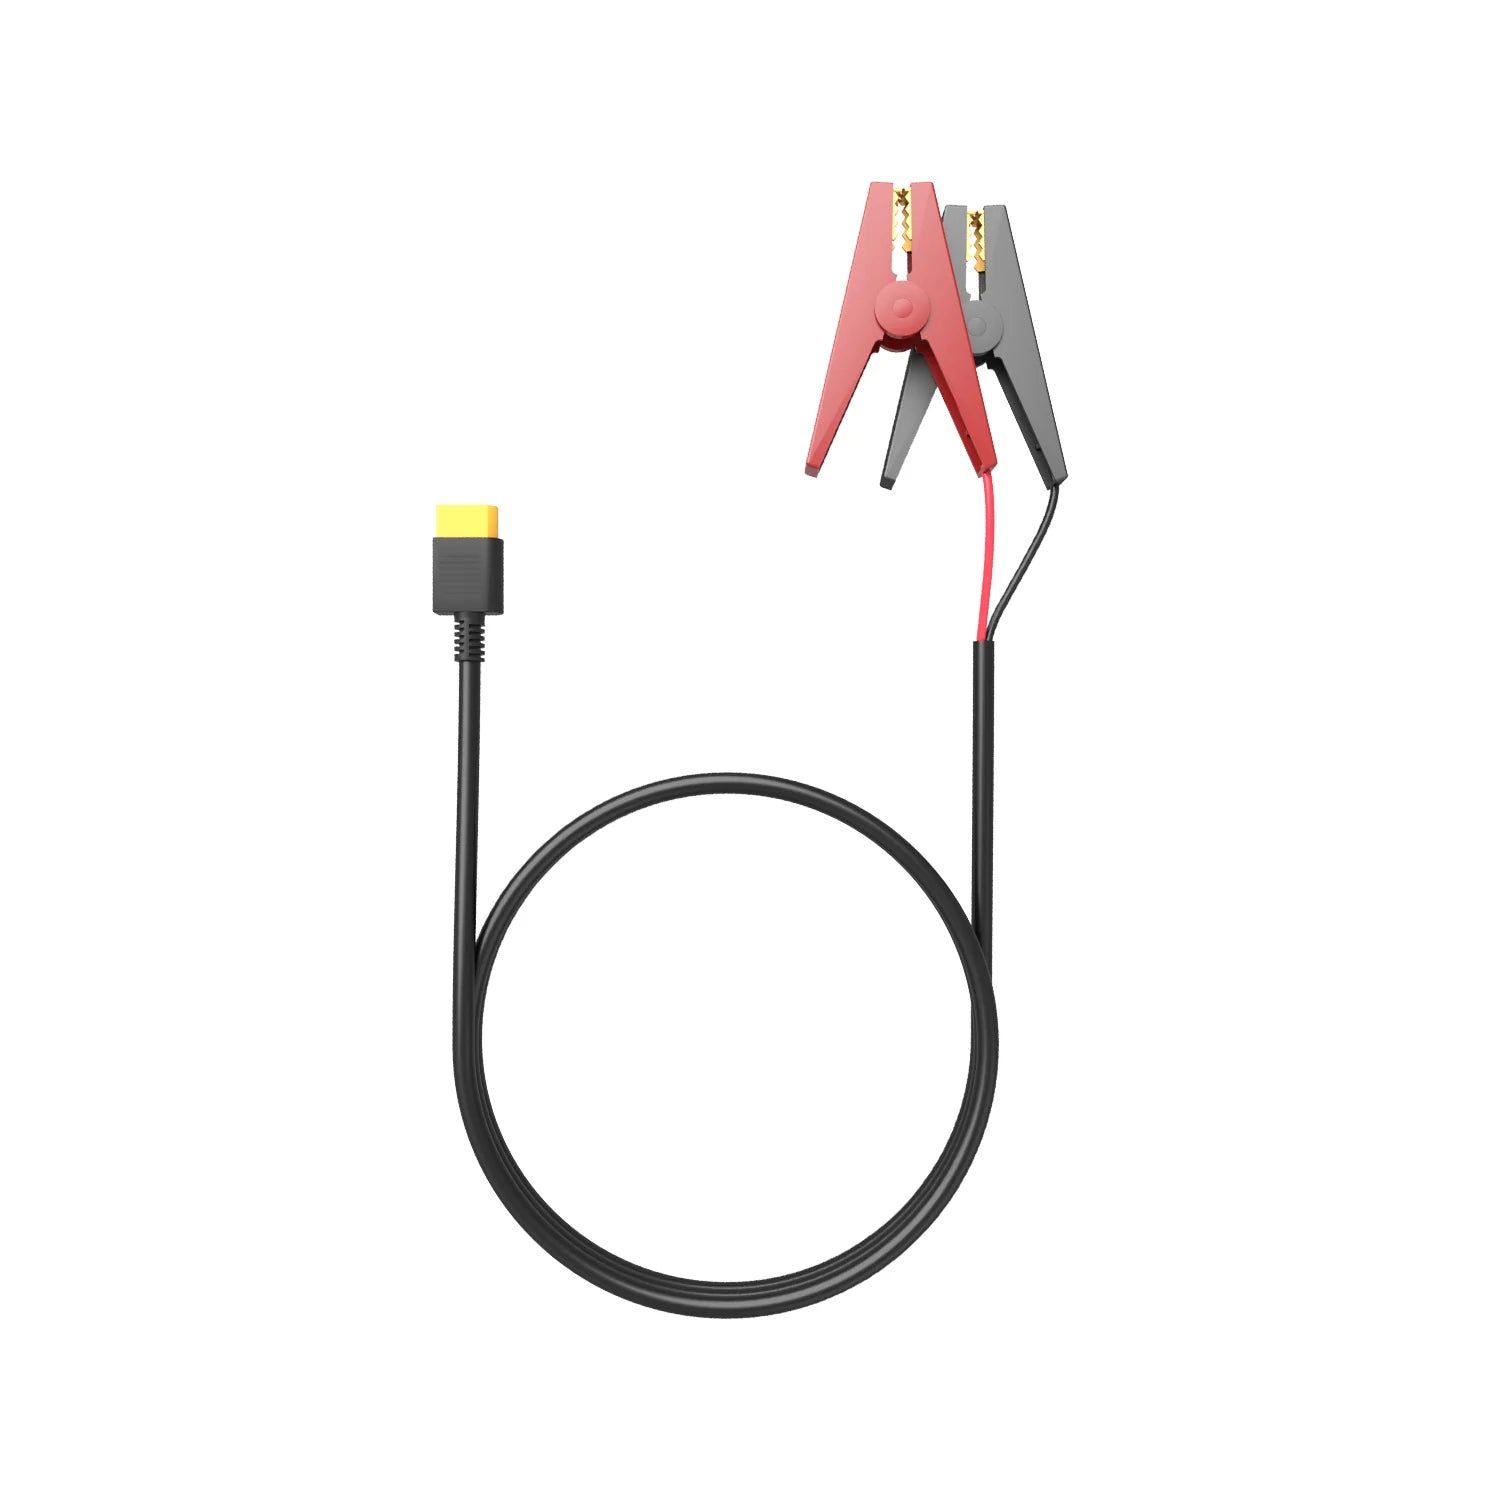 Bluetti Lead-Acid Battery Charging Cable